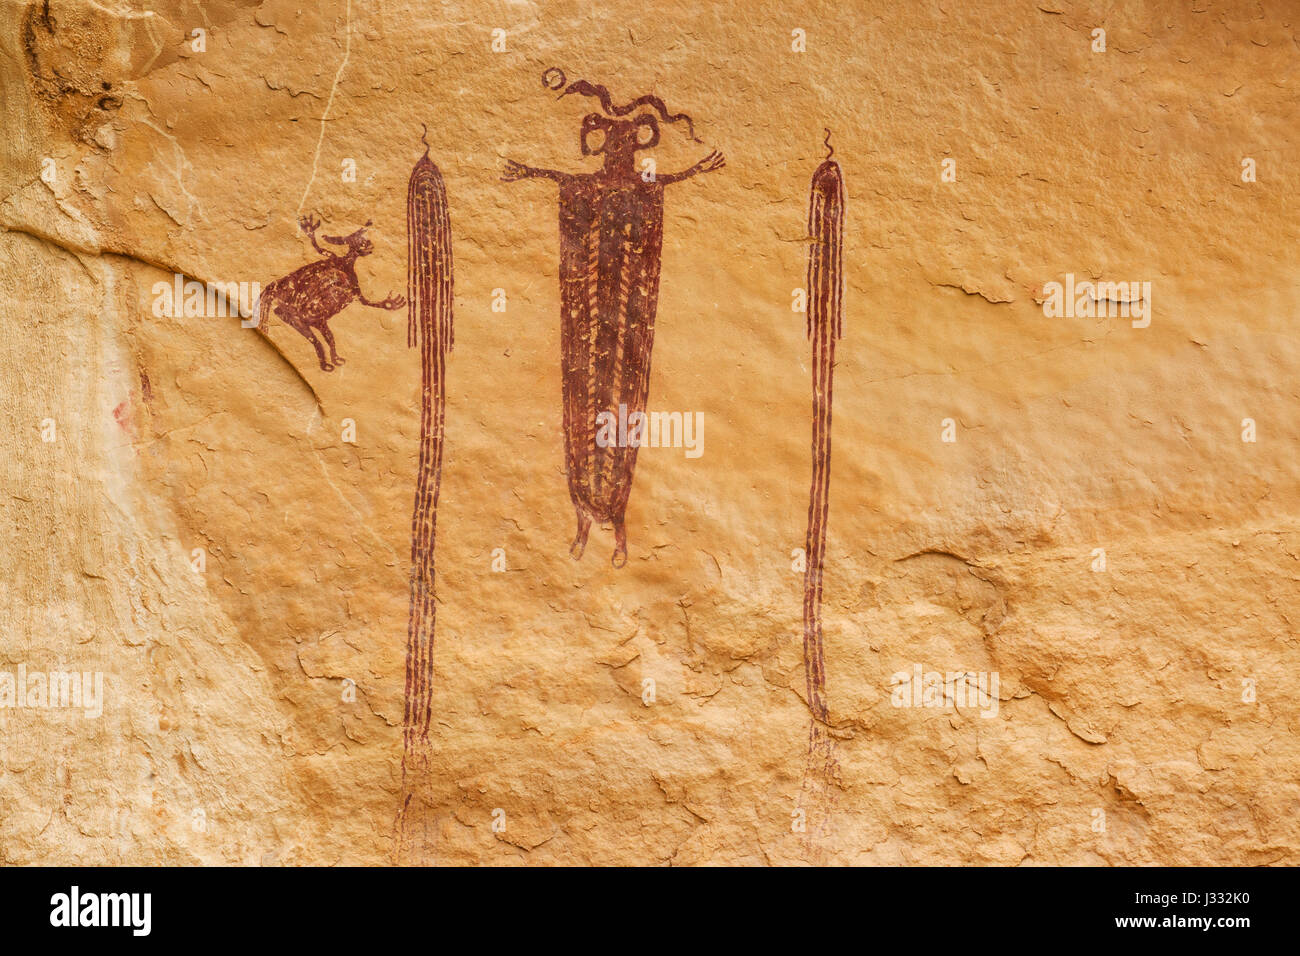 head of sinbad pictograph panel in emery county near green river, utah Stock Photo